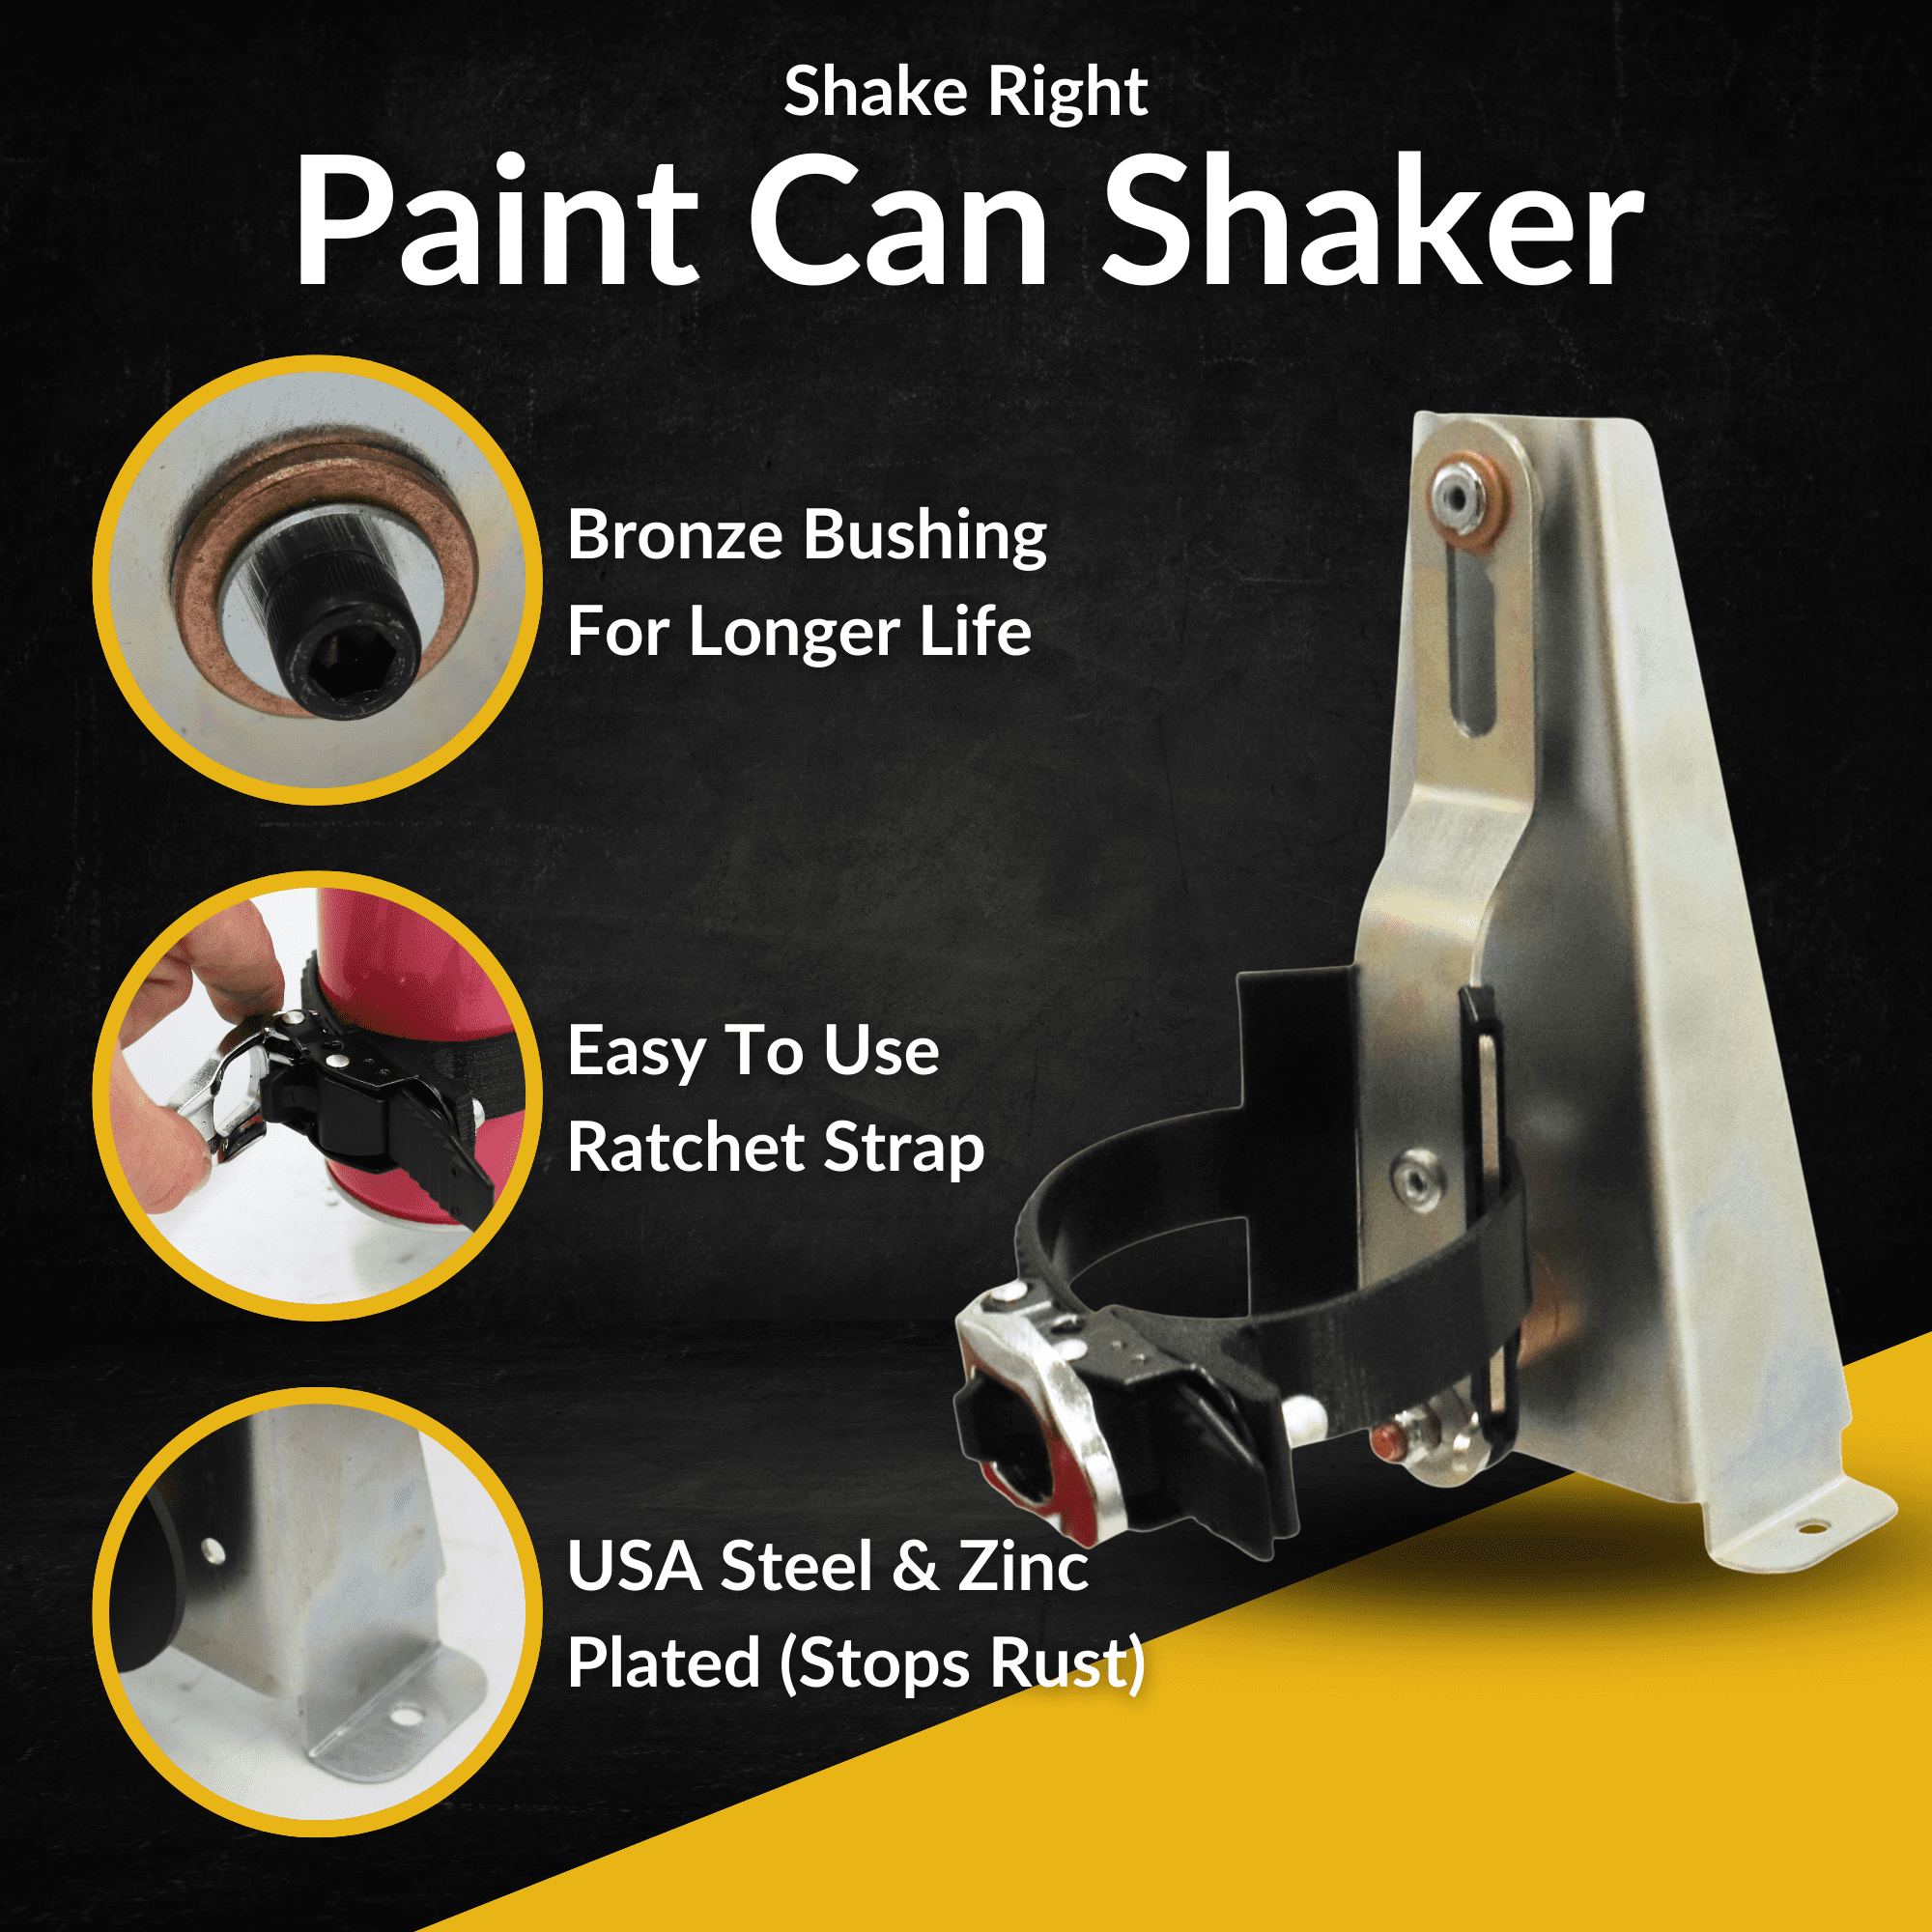 Transform Your Painting Experience with an Electric Paint Shaker